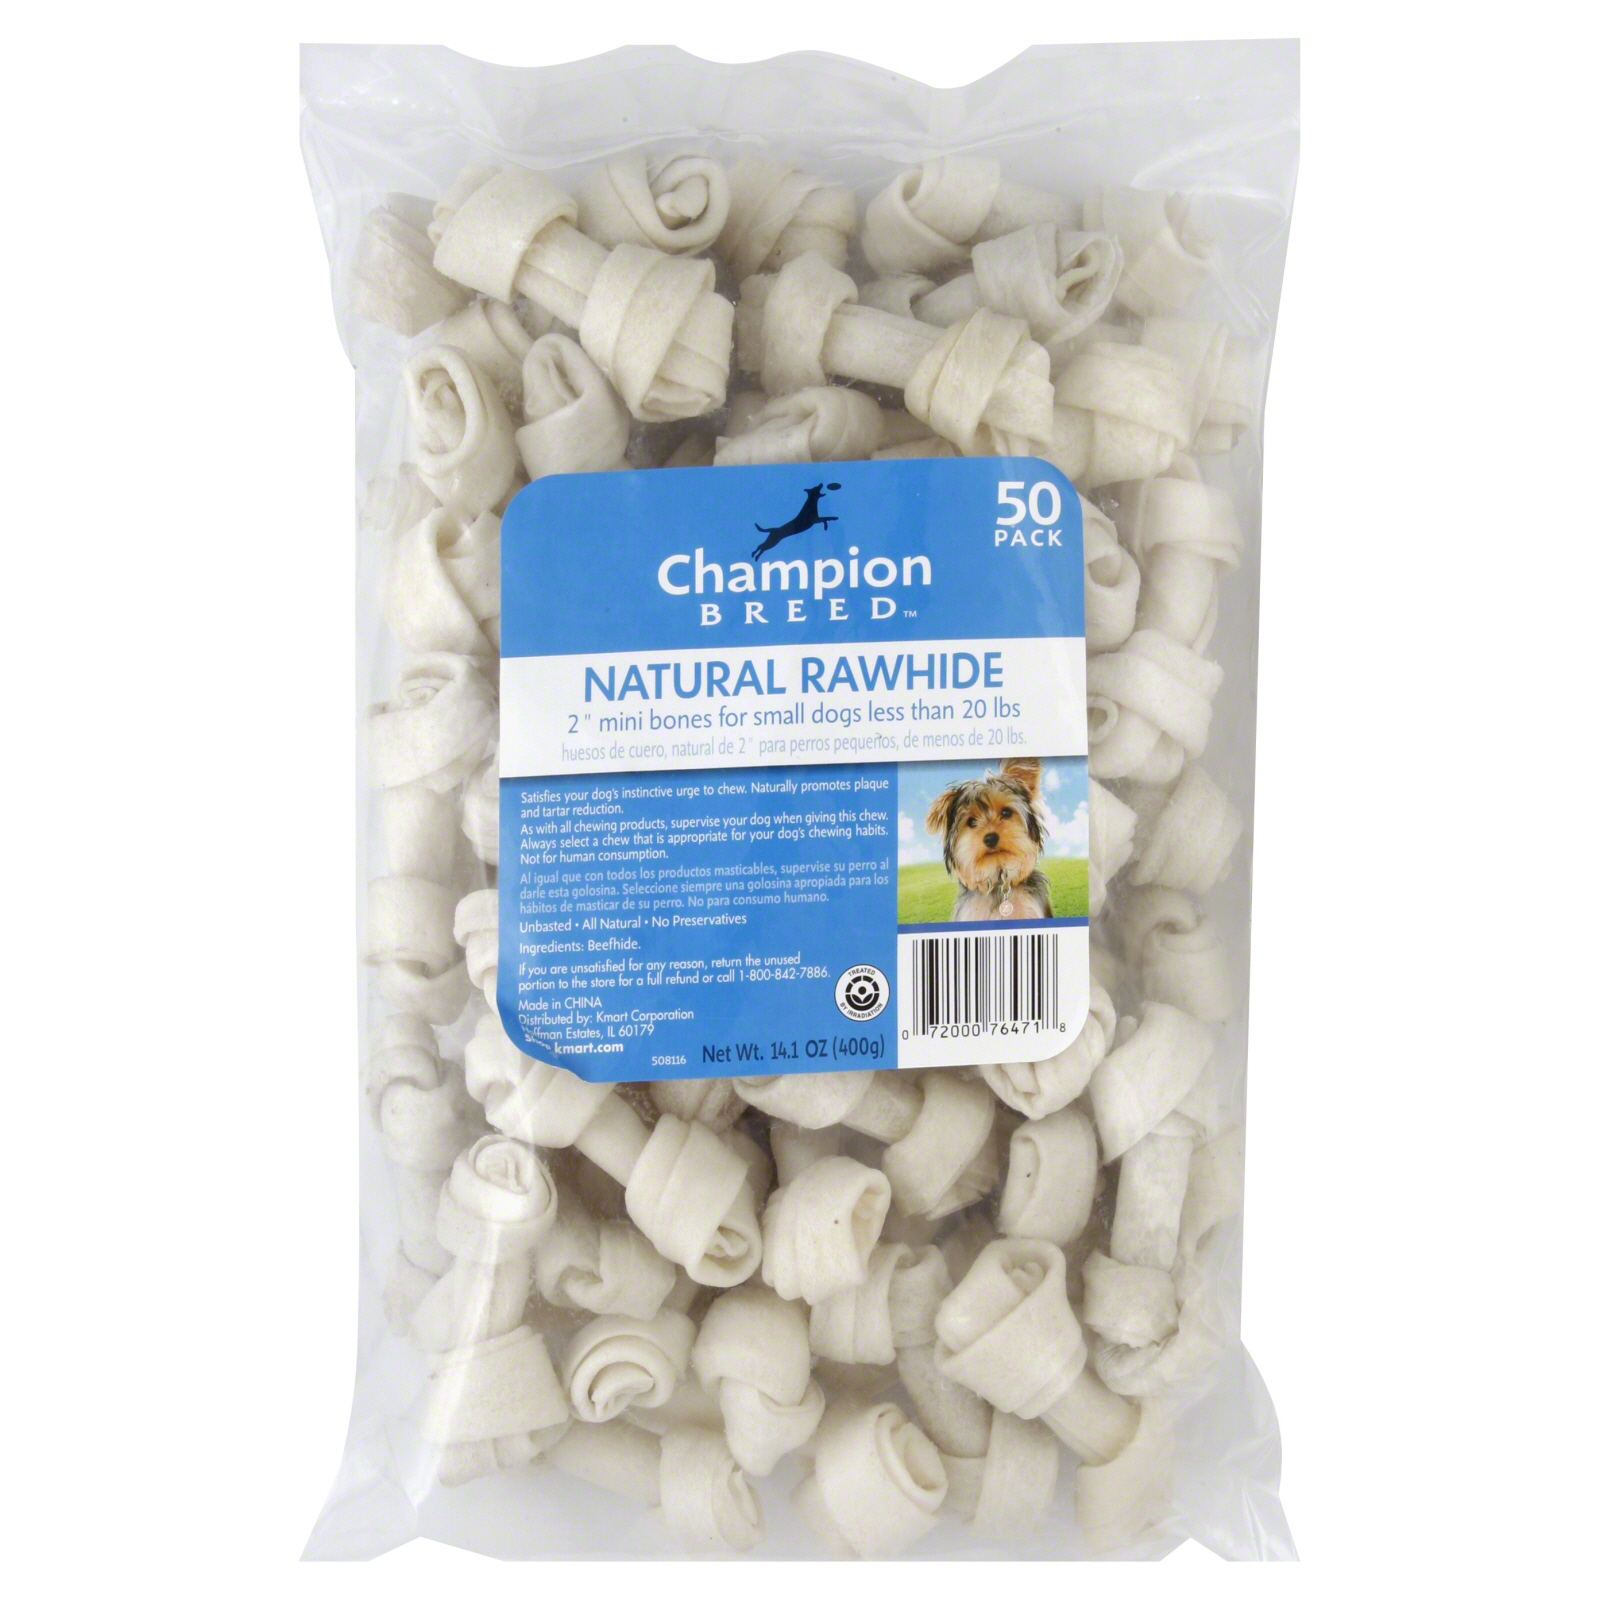 Champion Breed Natural Rawhide Mini Bones For Small Dogs 50-Count Bag